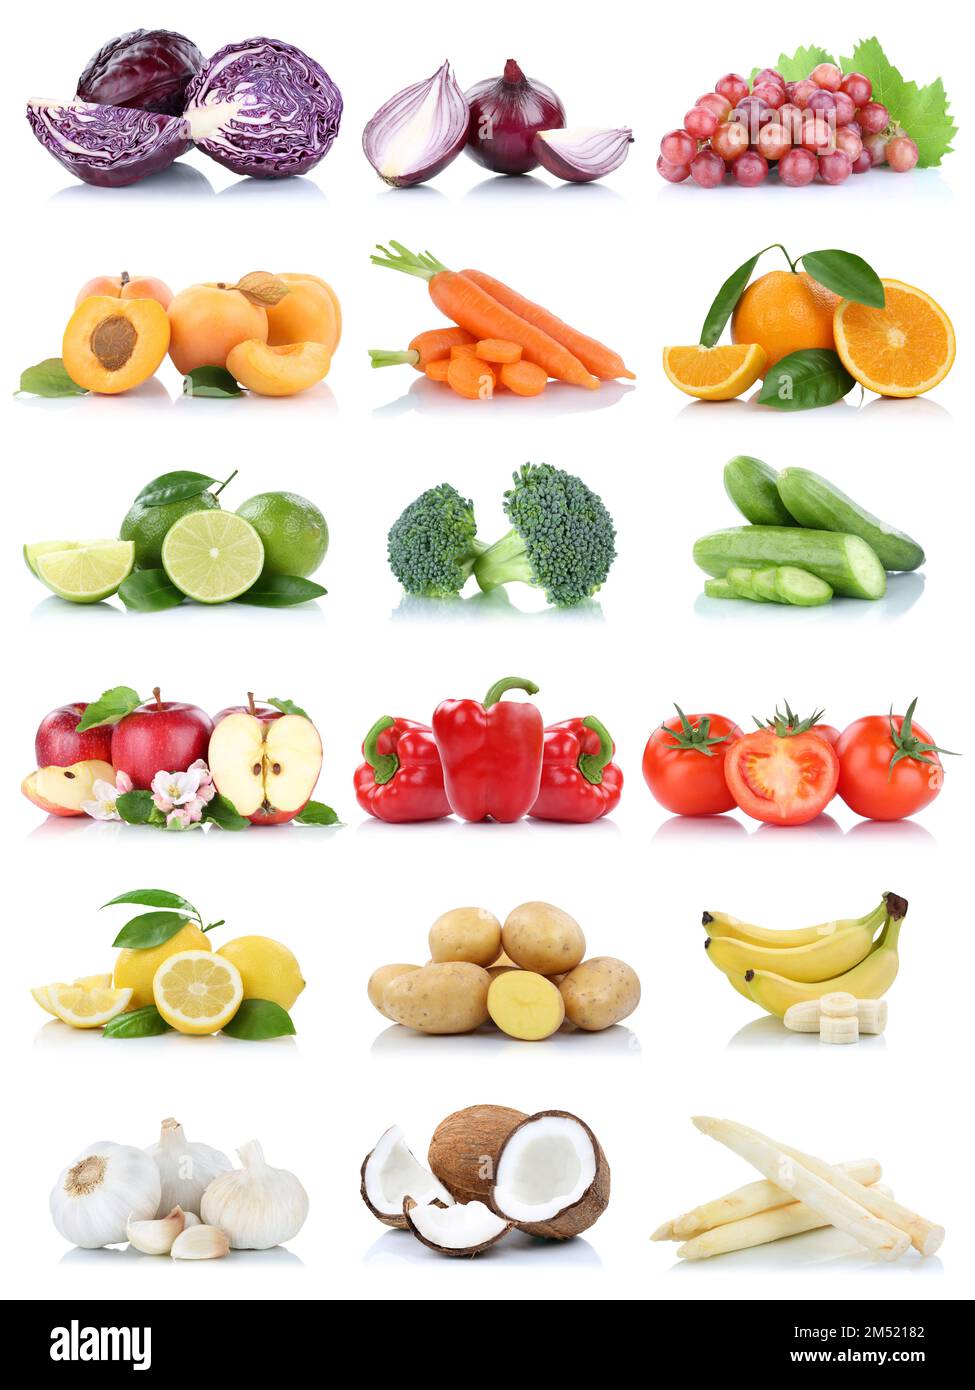 Fruits and vegetables collection isolated apple tomatoes orange garlic banana colors fresh fruit on a white background Stock Photo